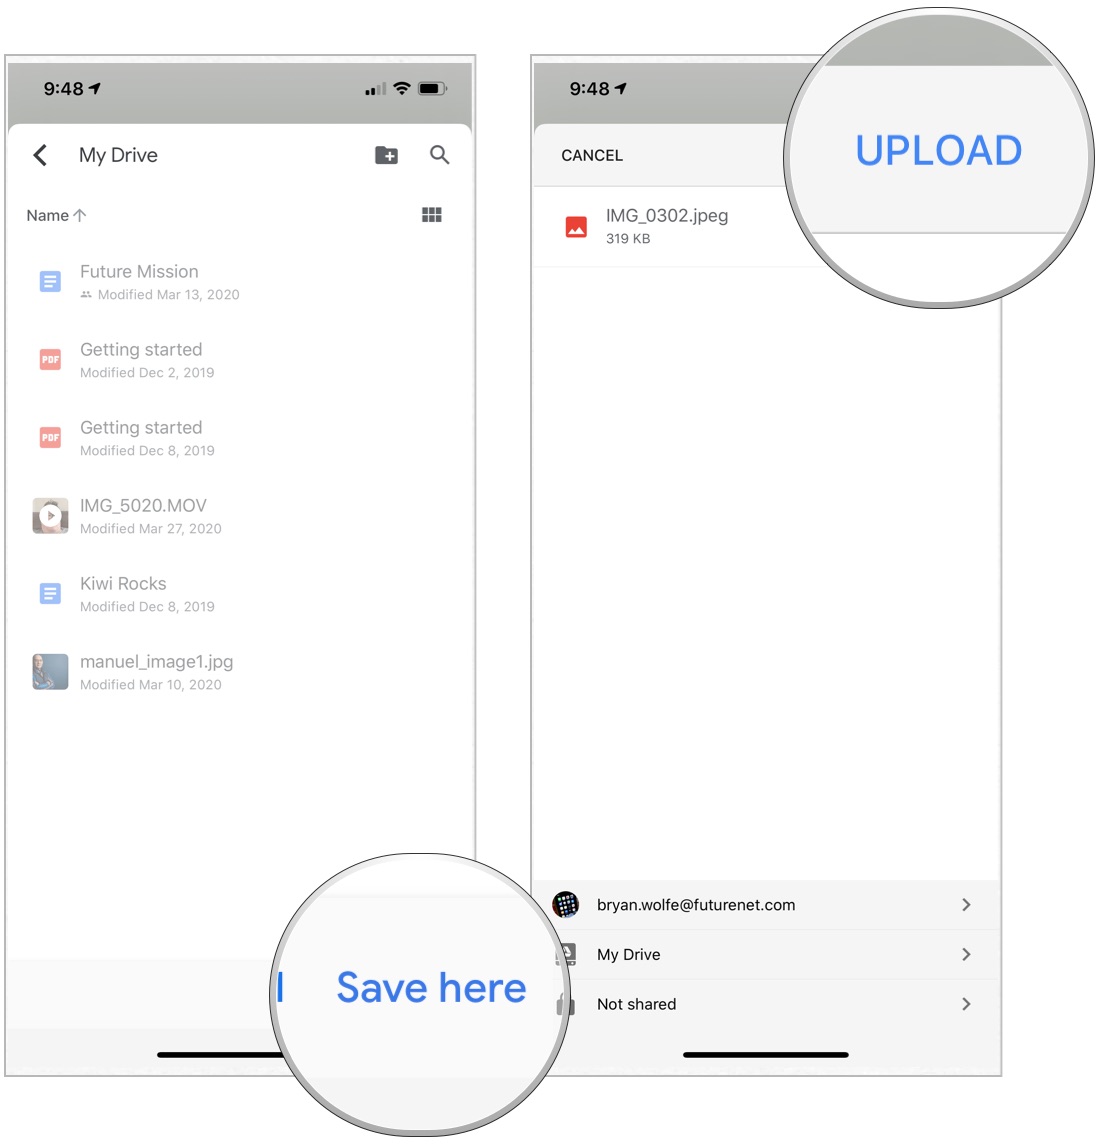 To save your attachment to Google Drive, choose Save Here. Then select Upload